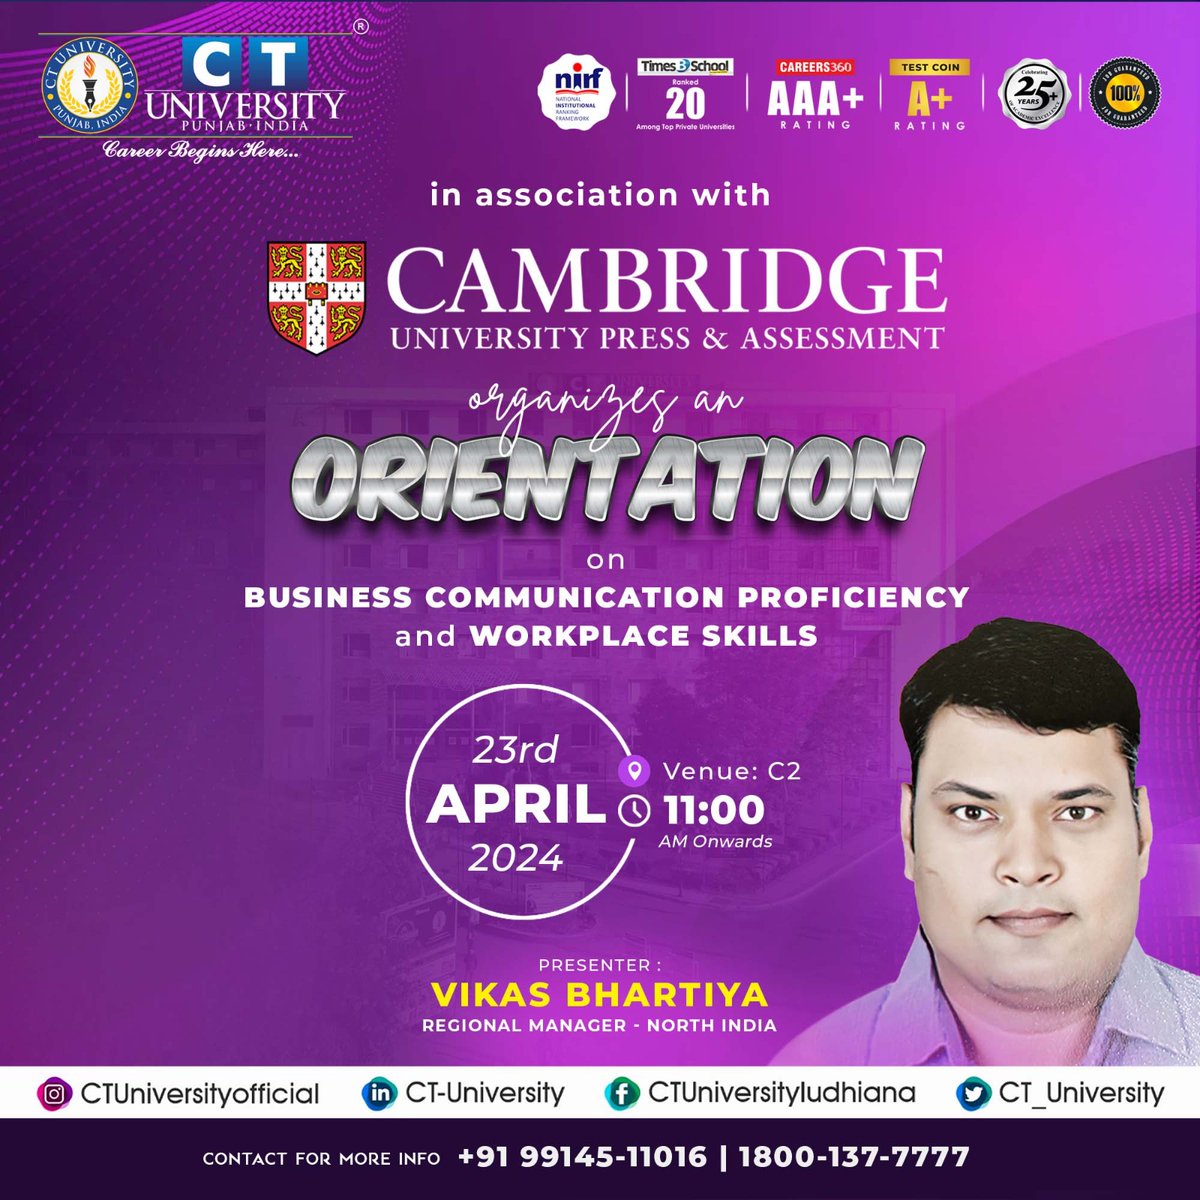 Elevate your #professional game with our #Business Communication Proficiency and Workplace Skills #orientation session! 🚀

#Join us on April 23rd at 11:00 AM in Venue C2 for expert insights from Vikas Bhartiya, Regional Manager - #North_India.

#CTU #cambridgeuniversity #TeamCT